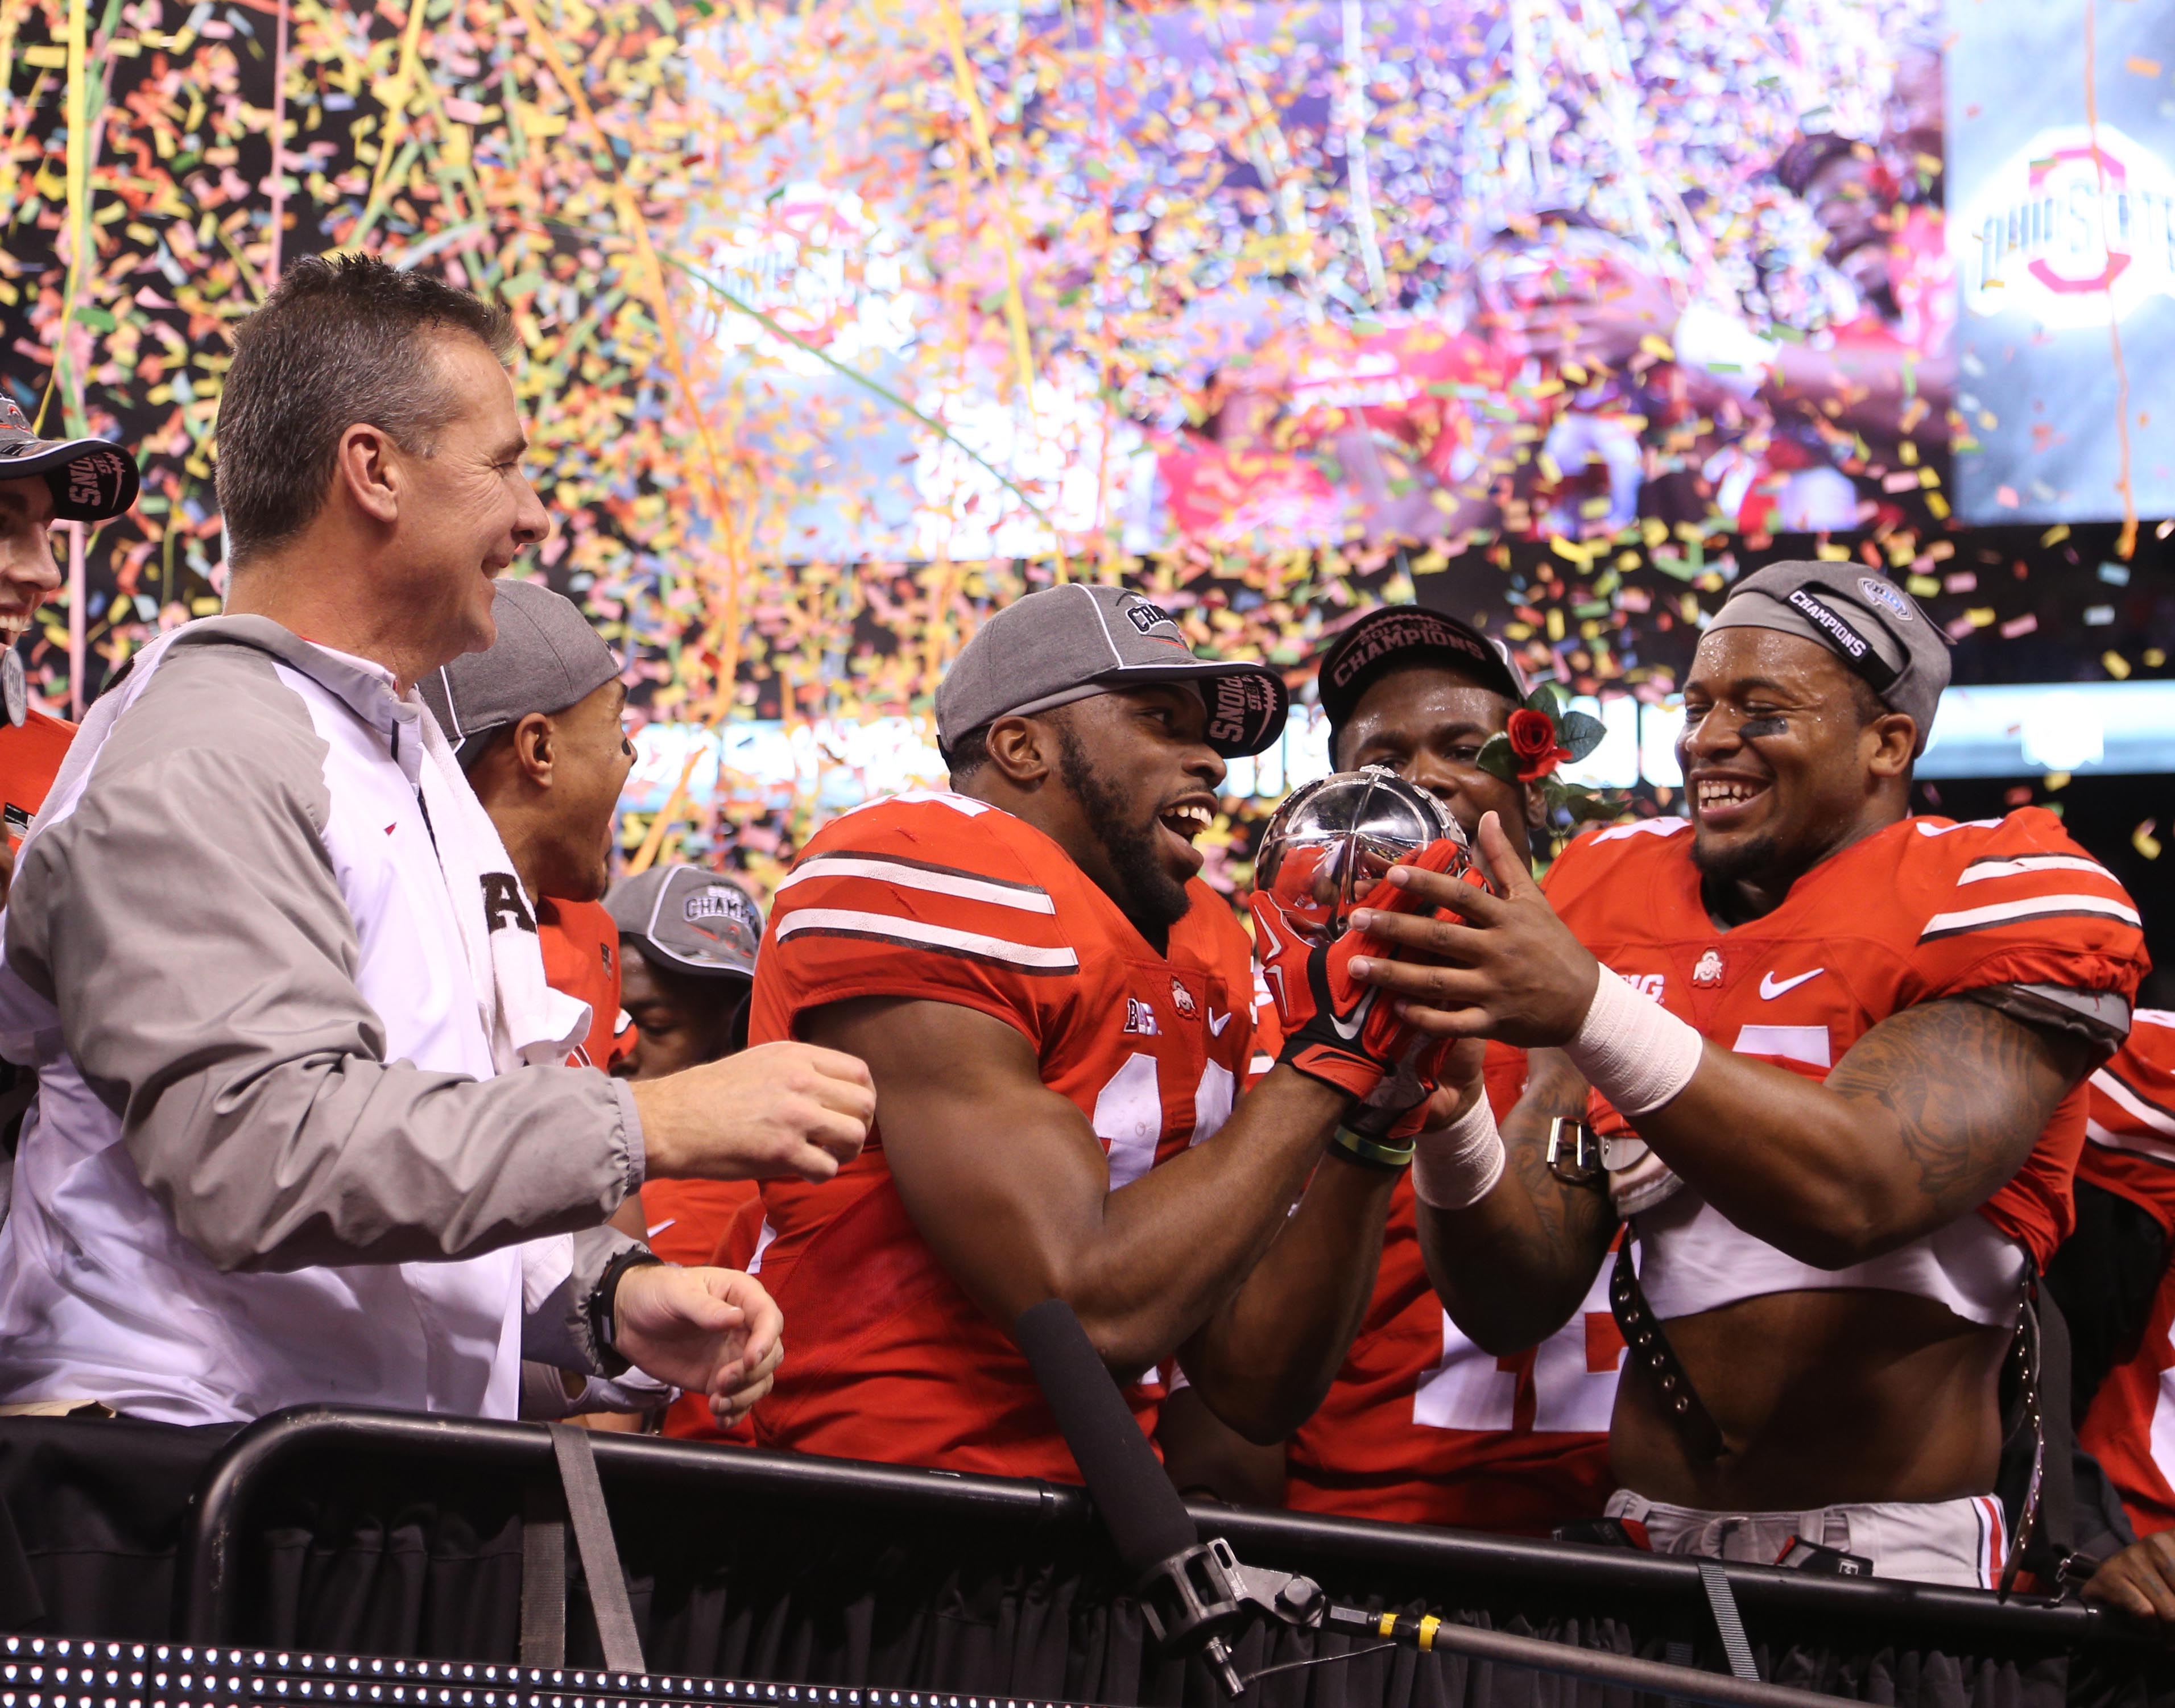 Ohio State rolls to 590 victory over Wisconsin in Big Ten title game